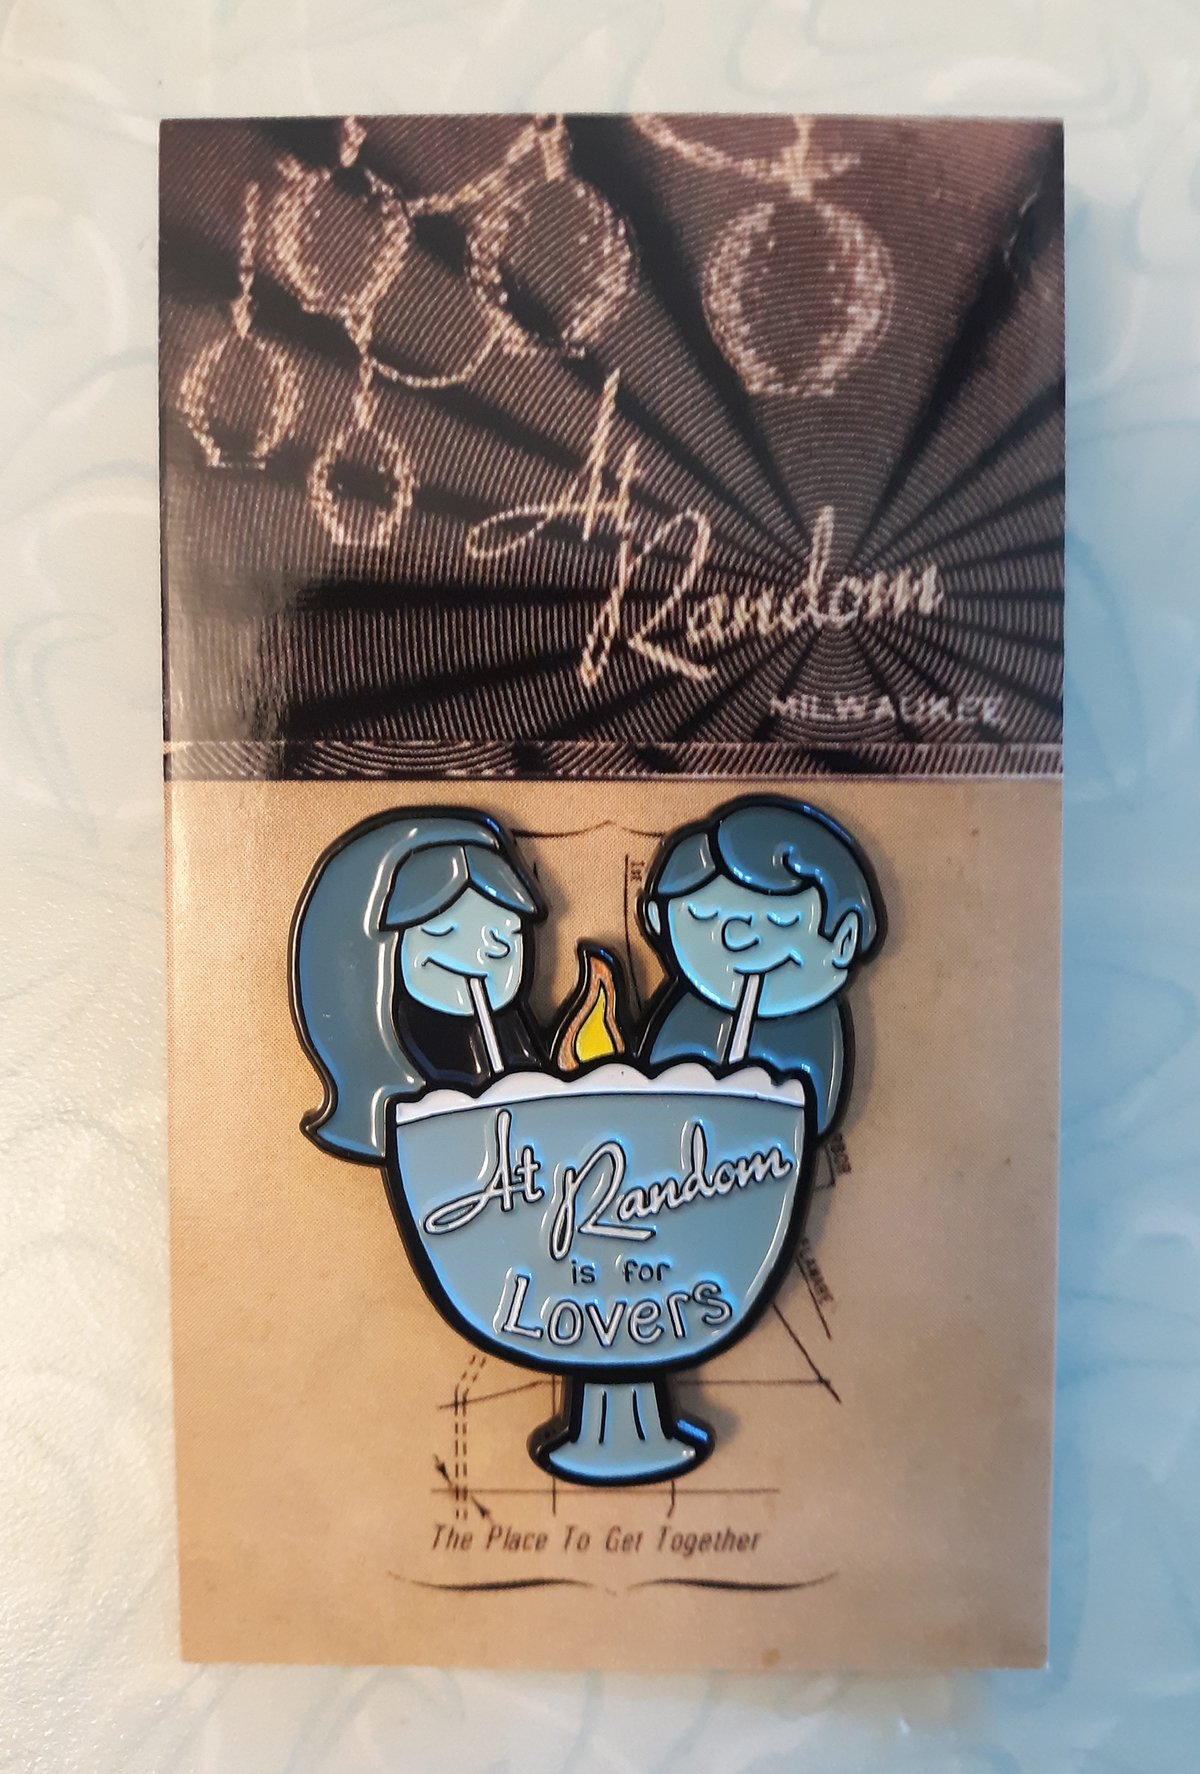 AT RANDOM IS FOR LOVERS Milwaukee Tiki Love Bowl BLUE 1.75" Soft Enamel Pin w/ Glowing Flame